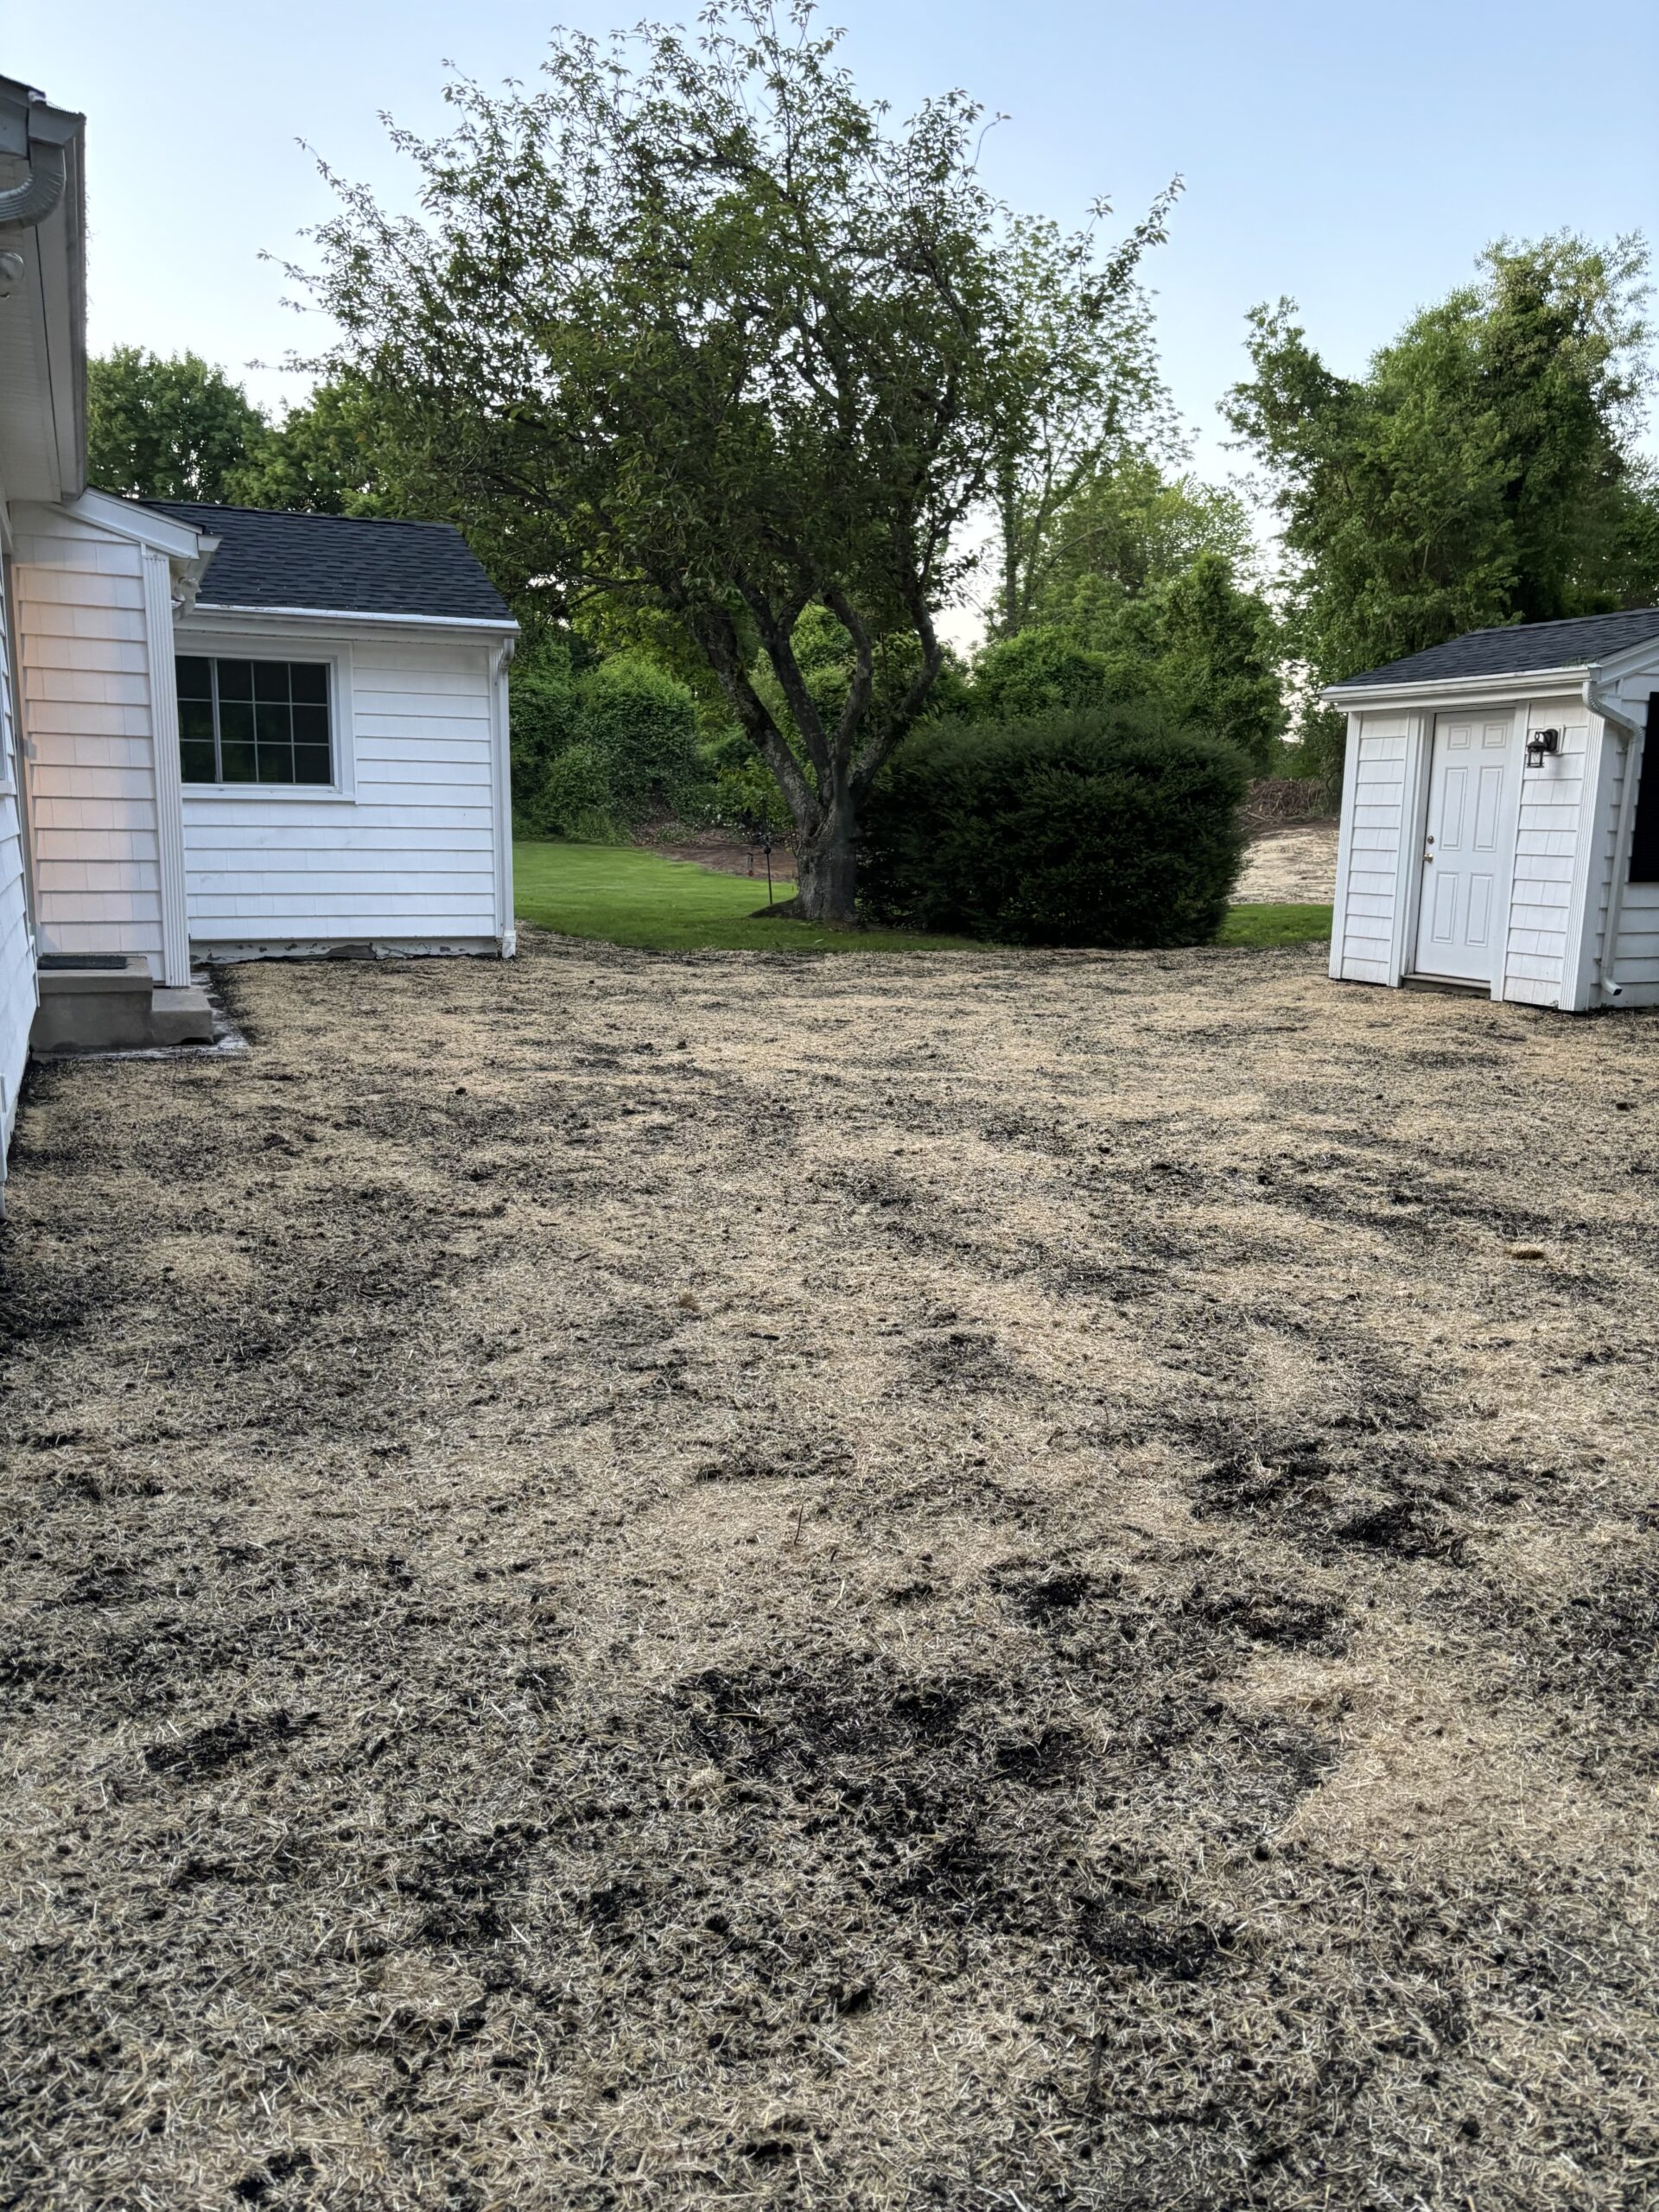 backyard dirt area after pool removal with fresh topsoil - grass seed and hay spread on surface of raked topsoil